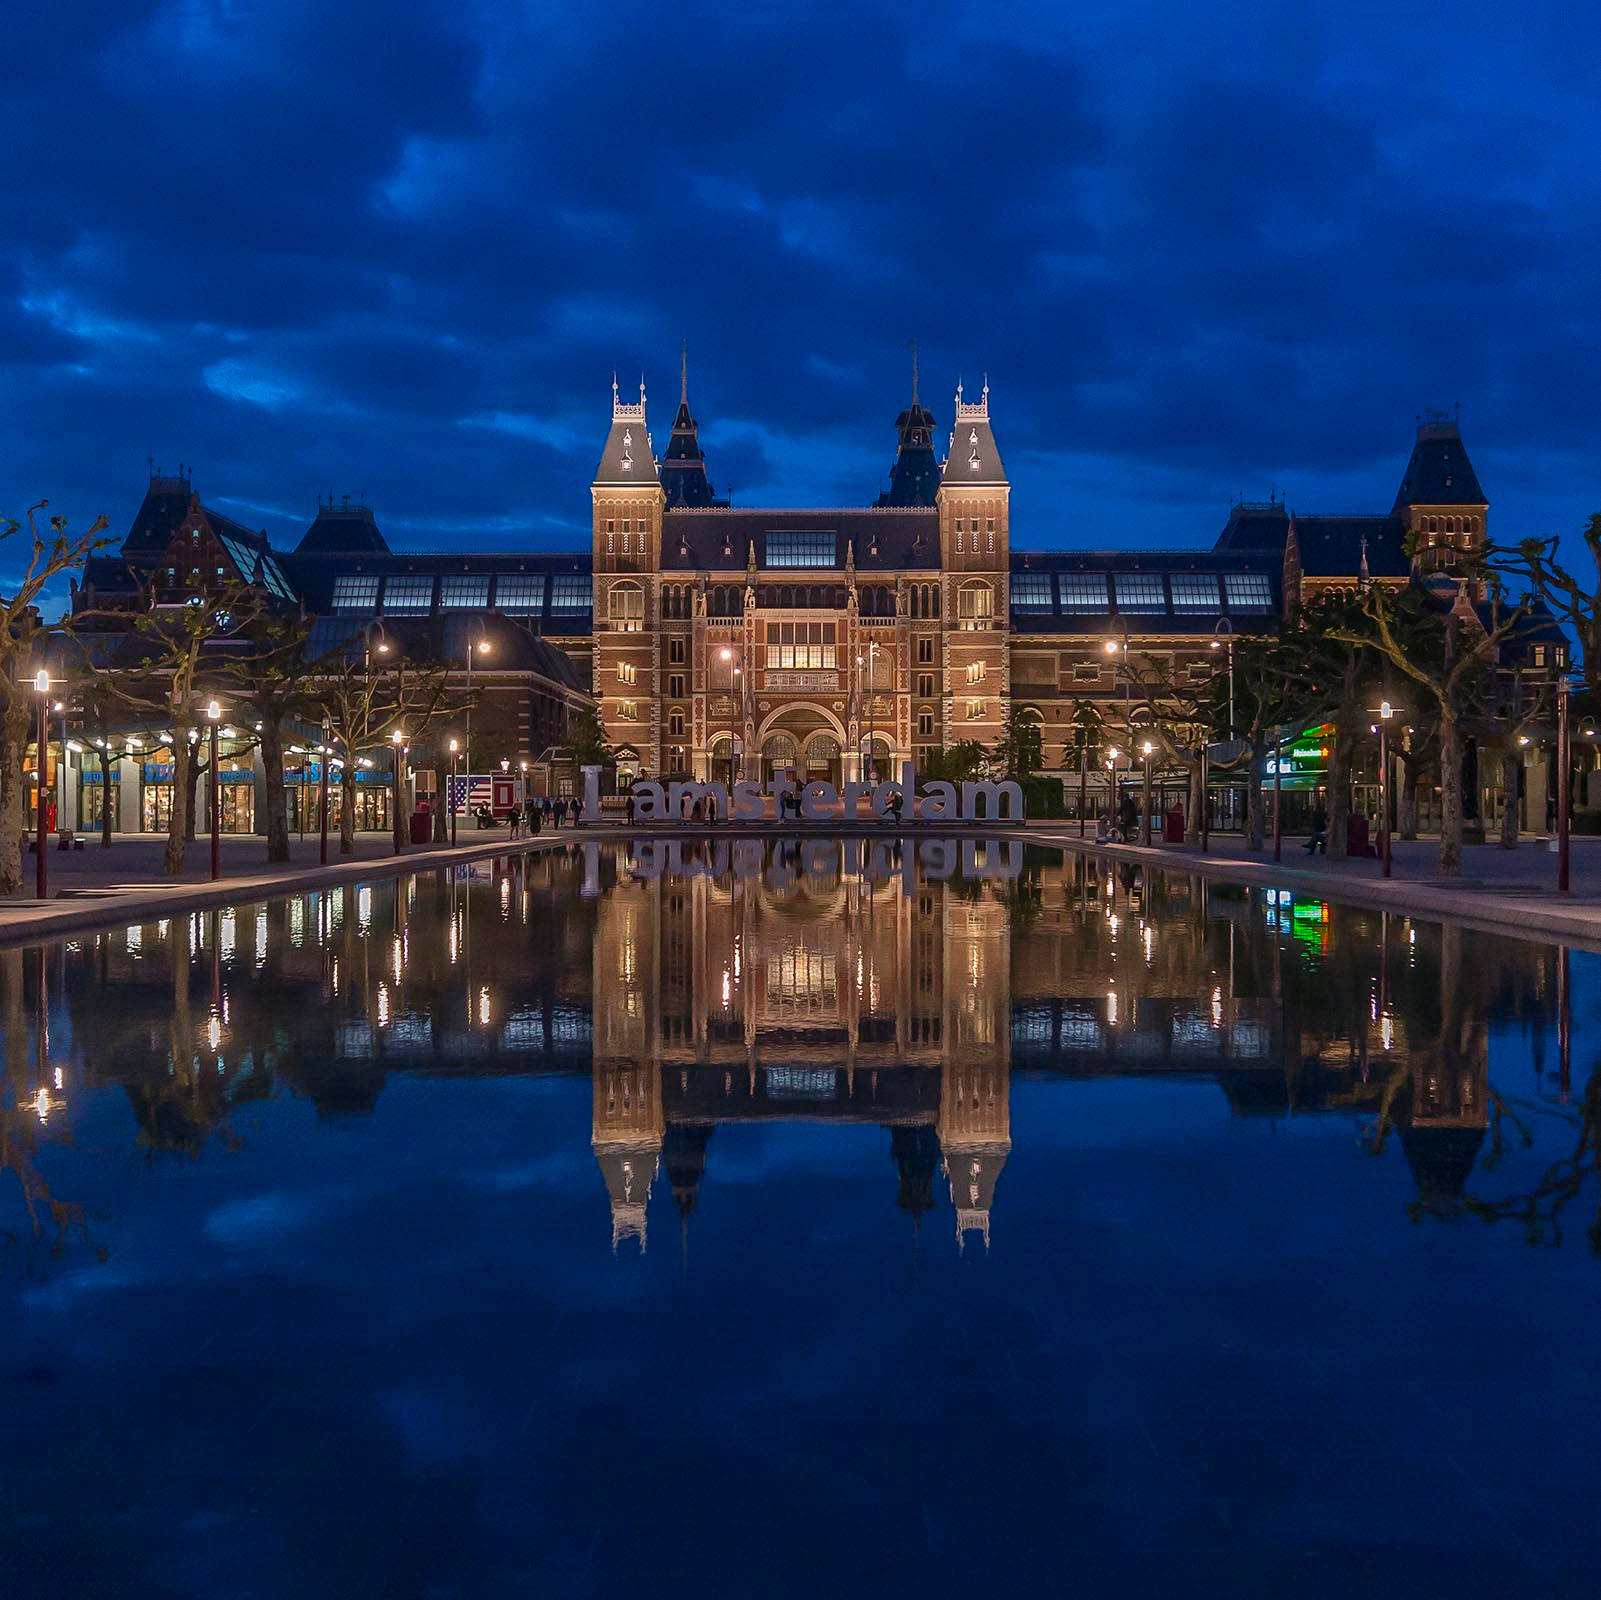 Rijksmuseum With Blue Sky At Night Wallpaper